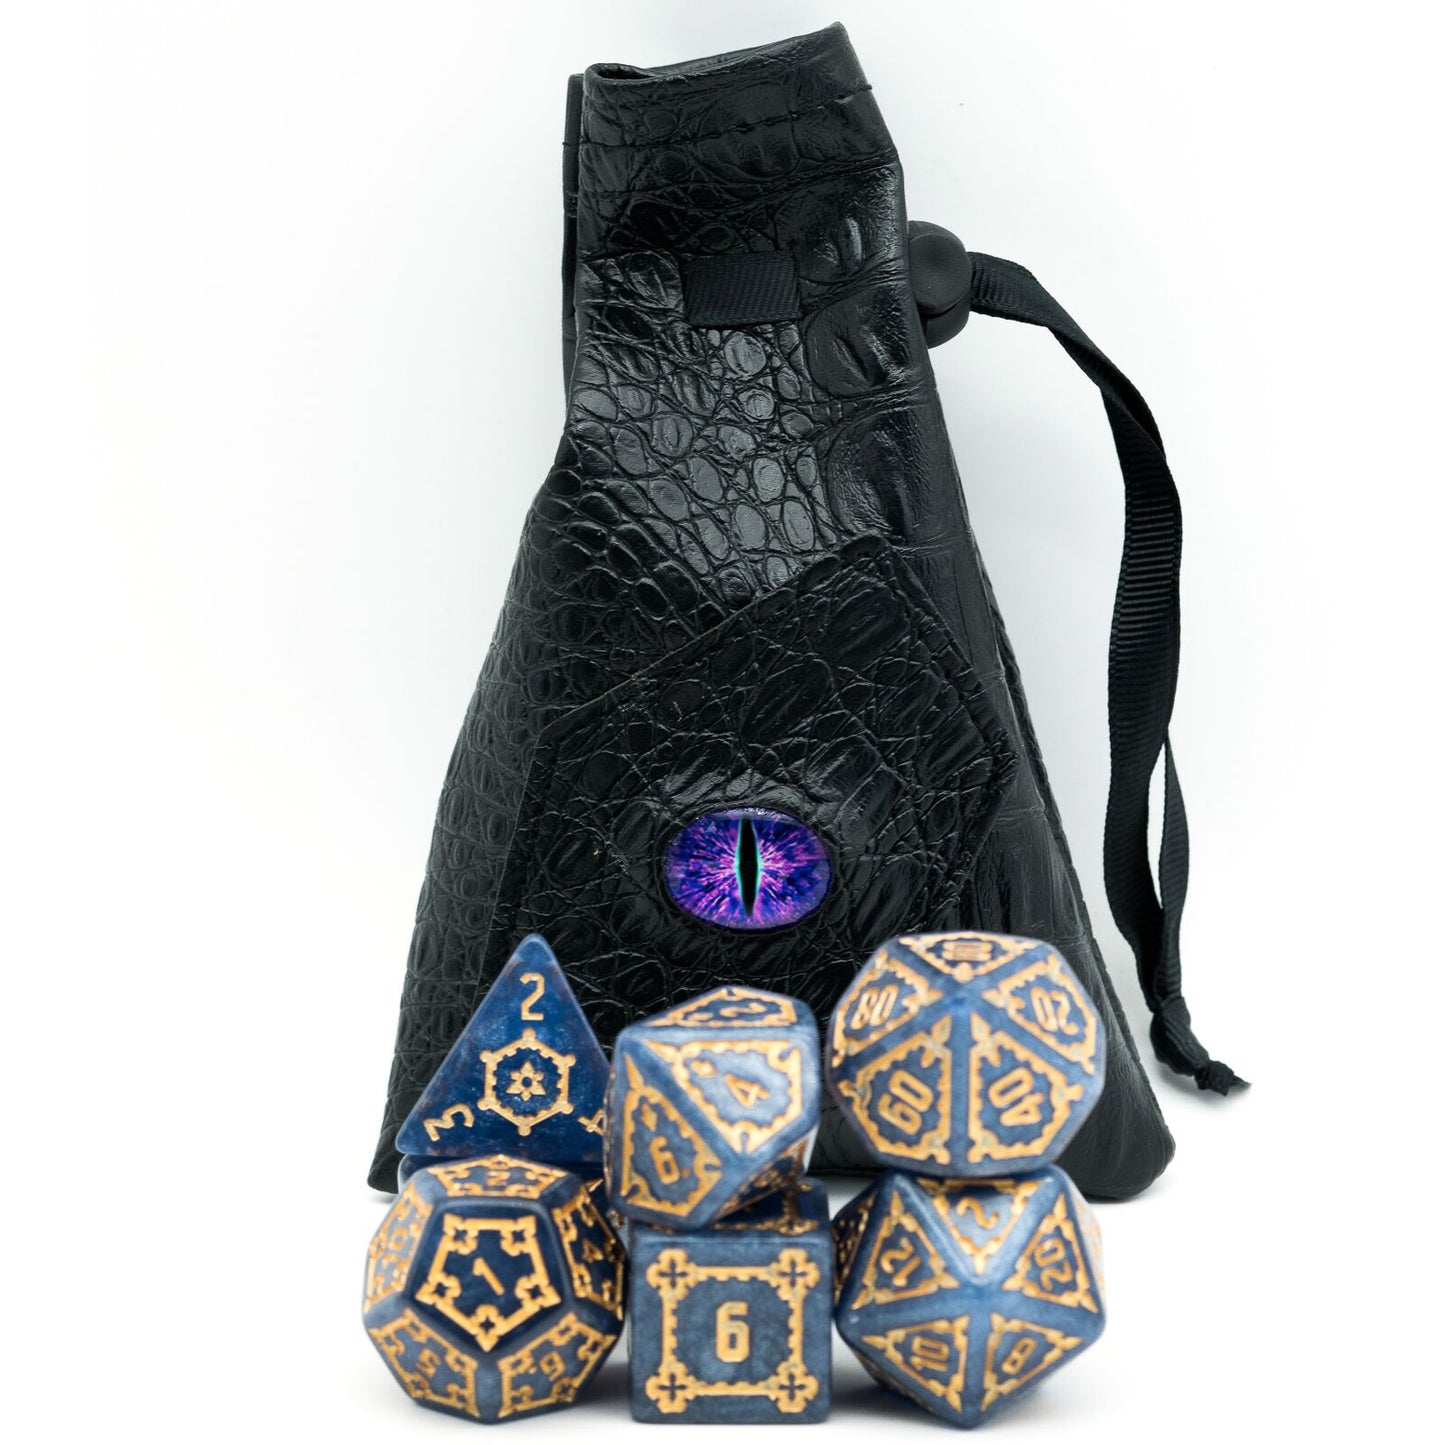 Huge dice set in front of complementary carrying bag